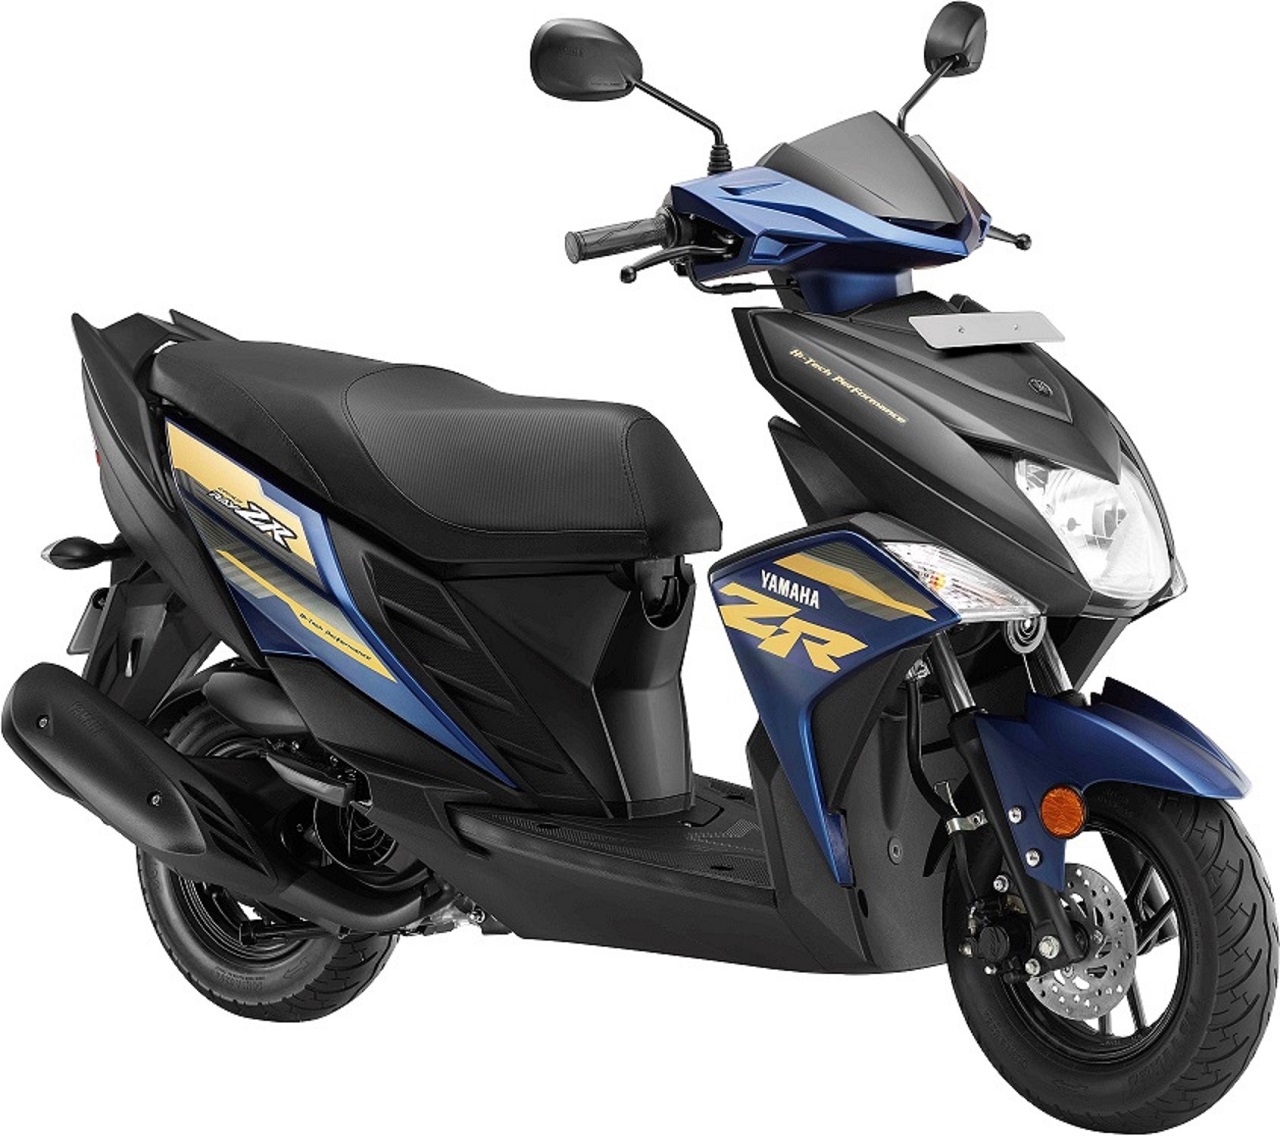 New colours of Yamaha Cygnus RayZR launched in India